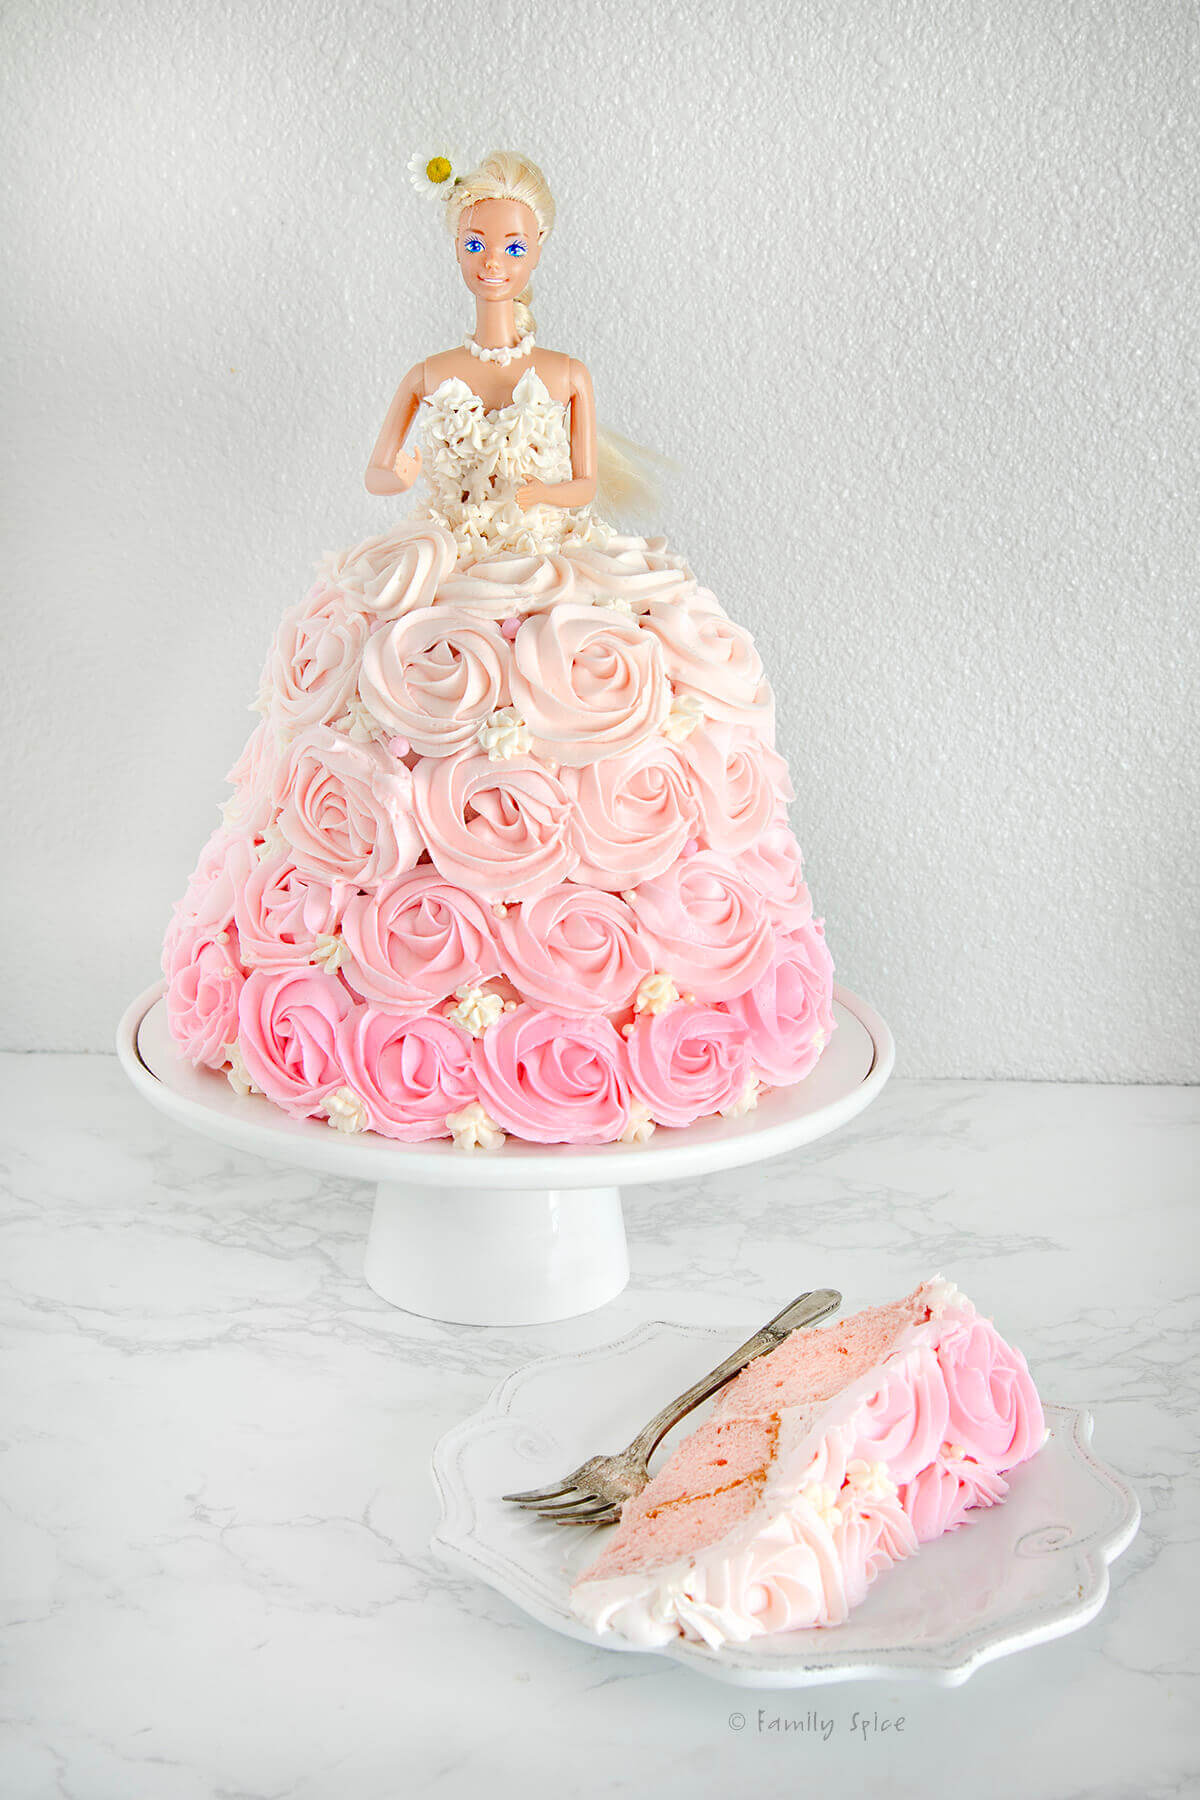 A pink ombre barbie cake on a white cake stand with a slice cut out on a plate